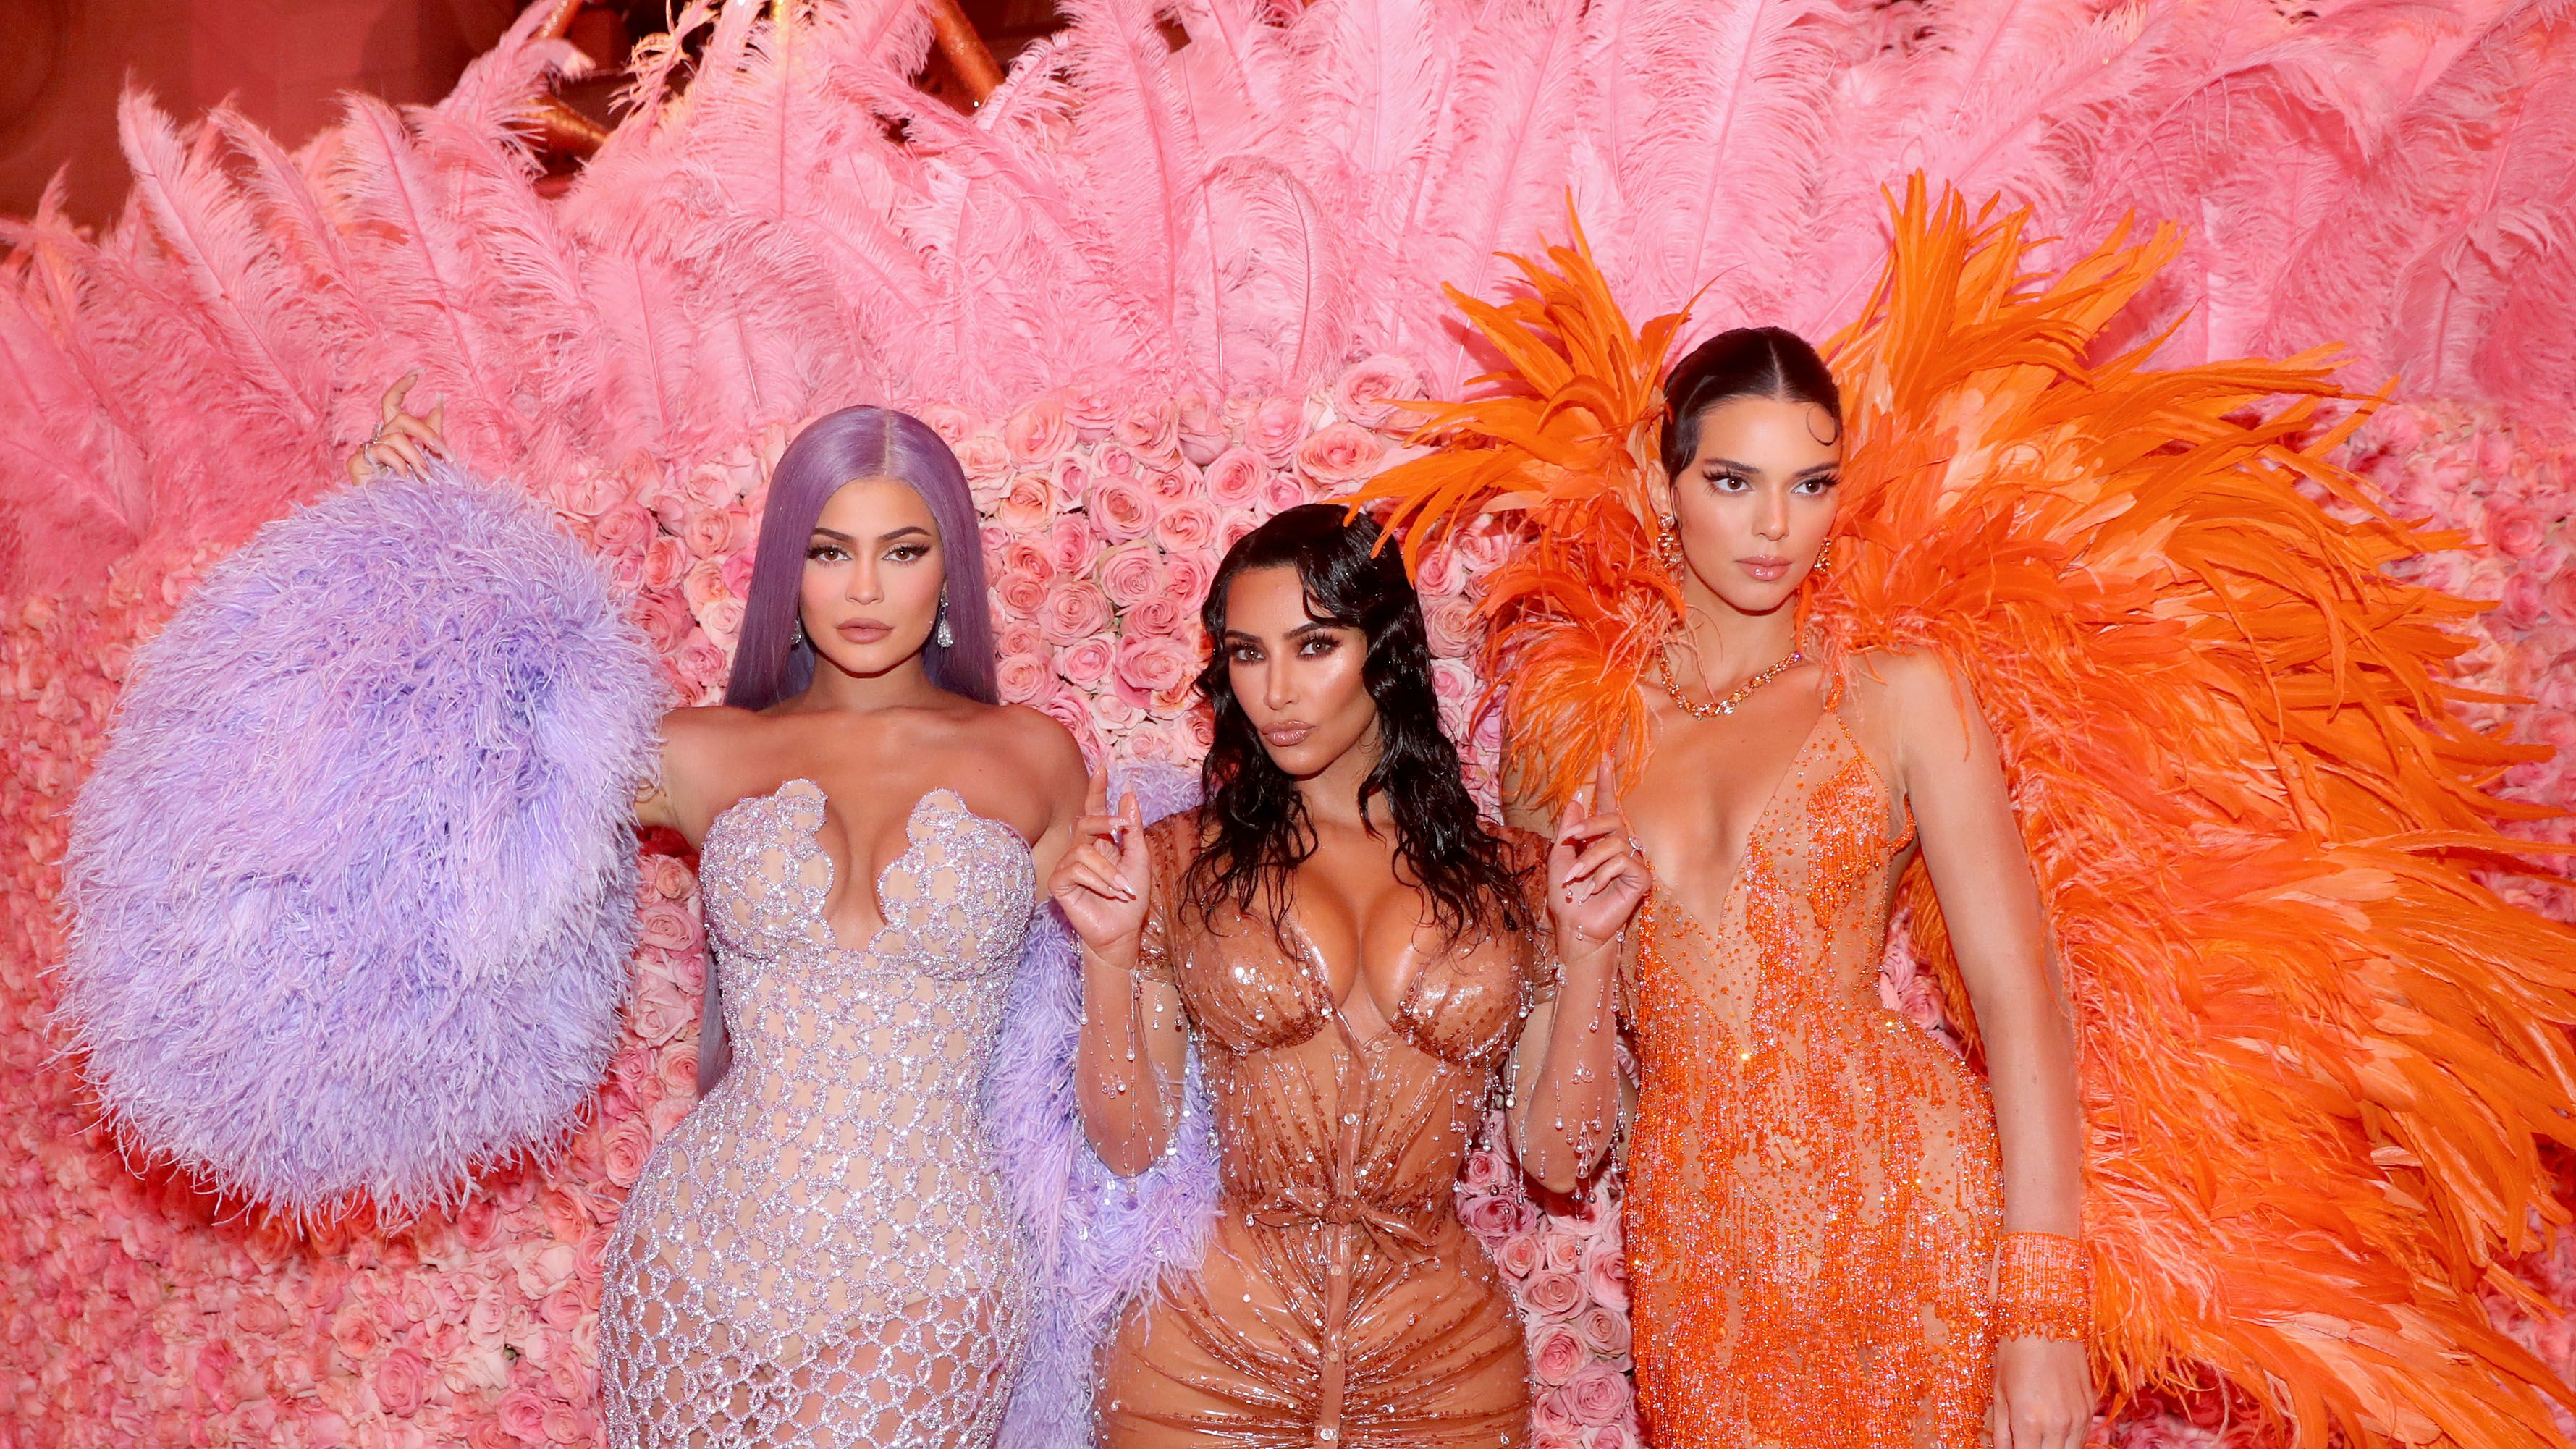 The Met Gala Is (Sort of) Shoppable on Instagram This Year